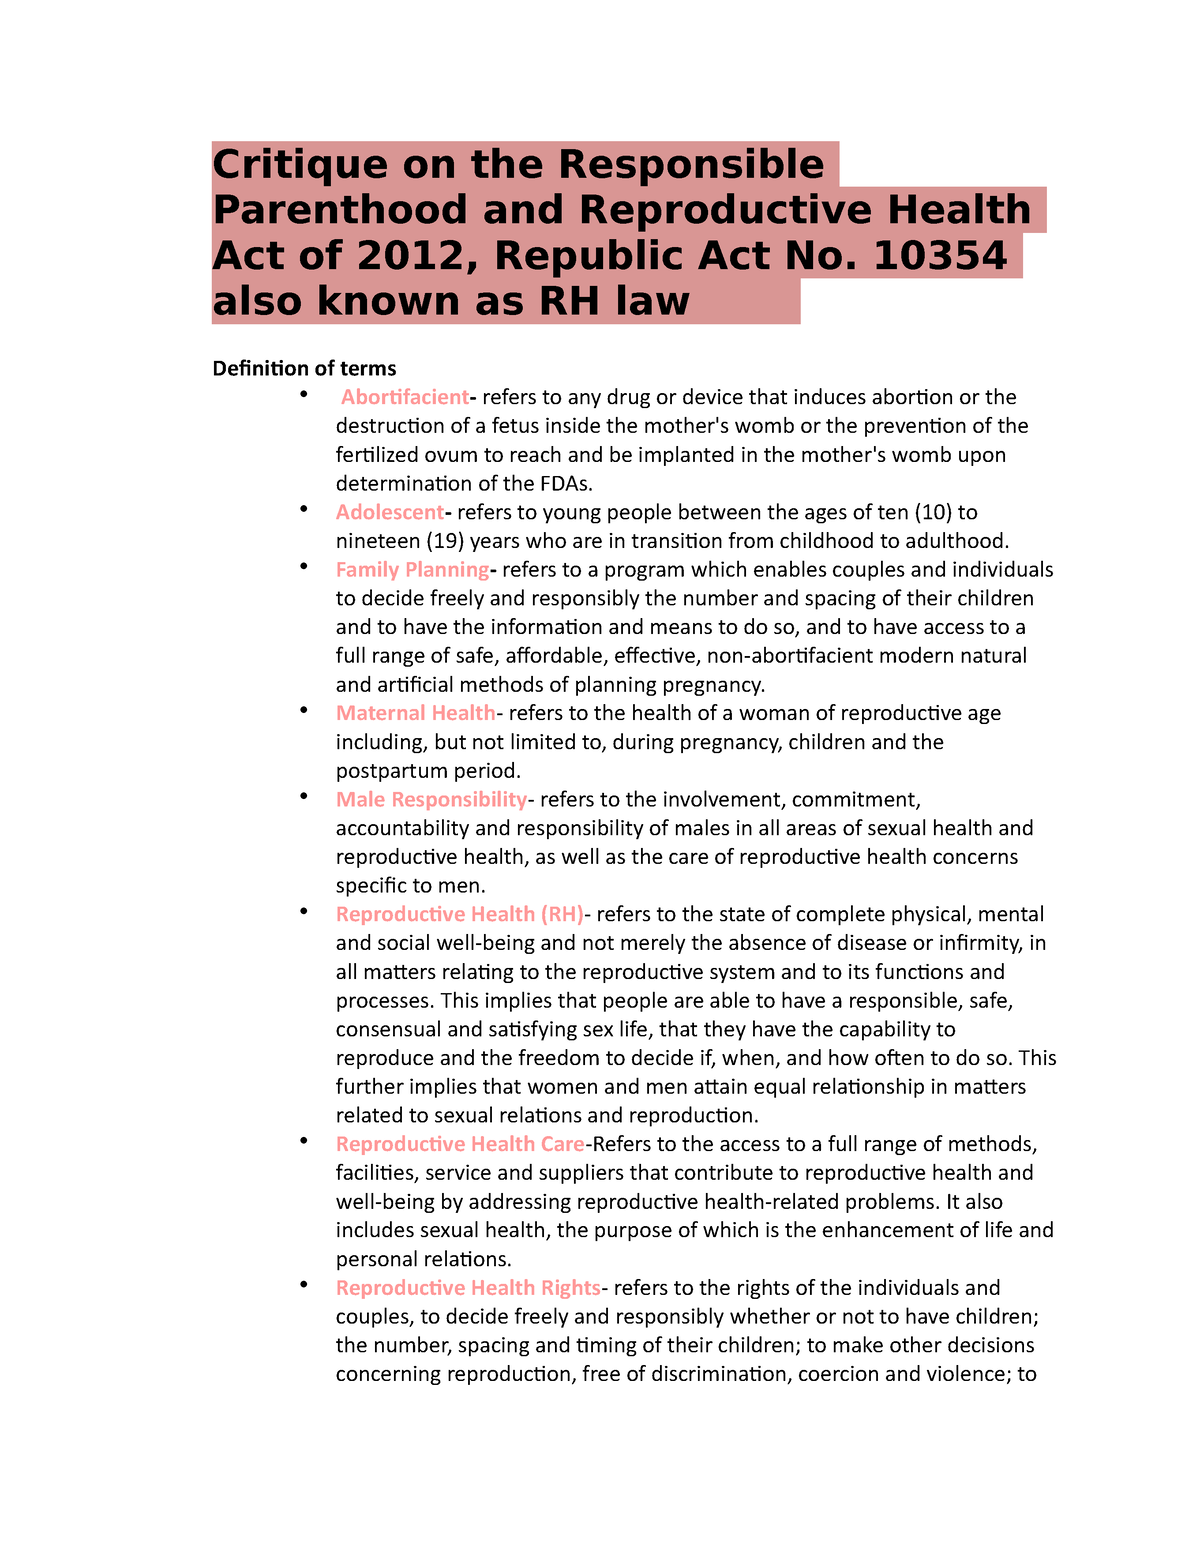 reproductive health thesis topics